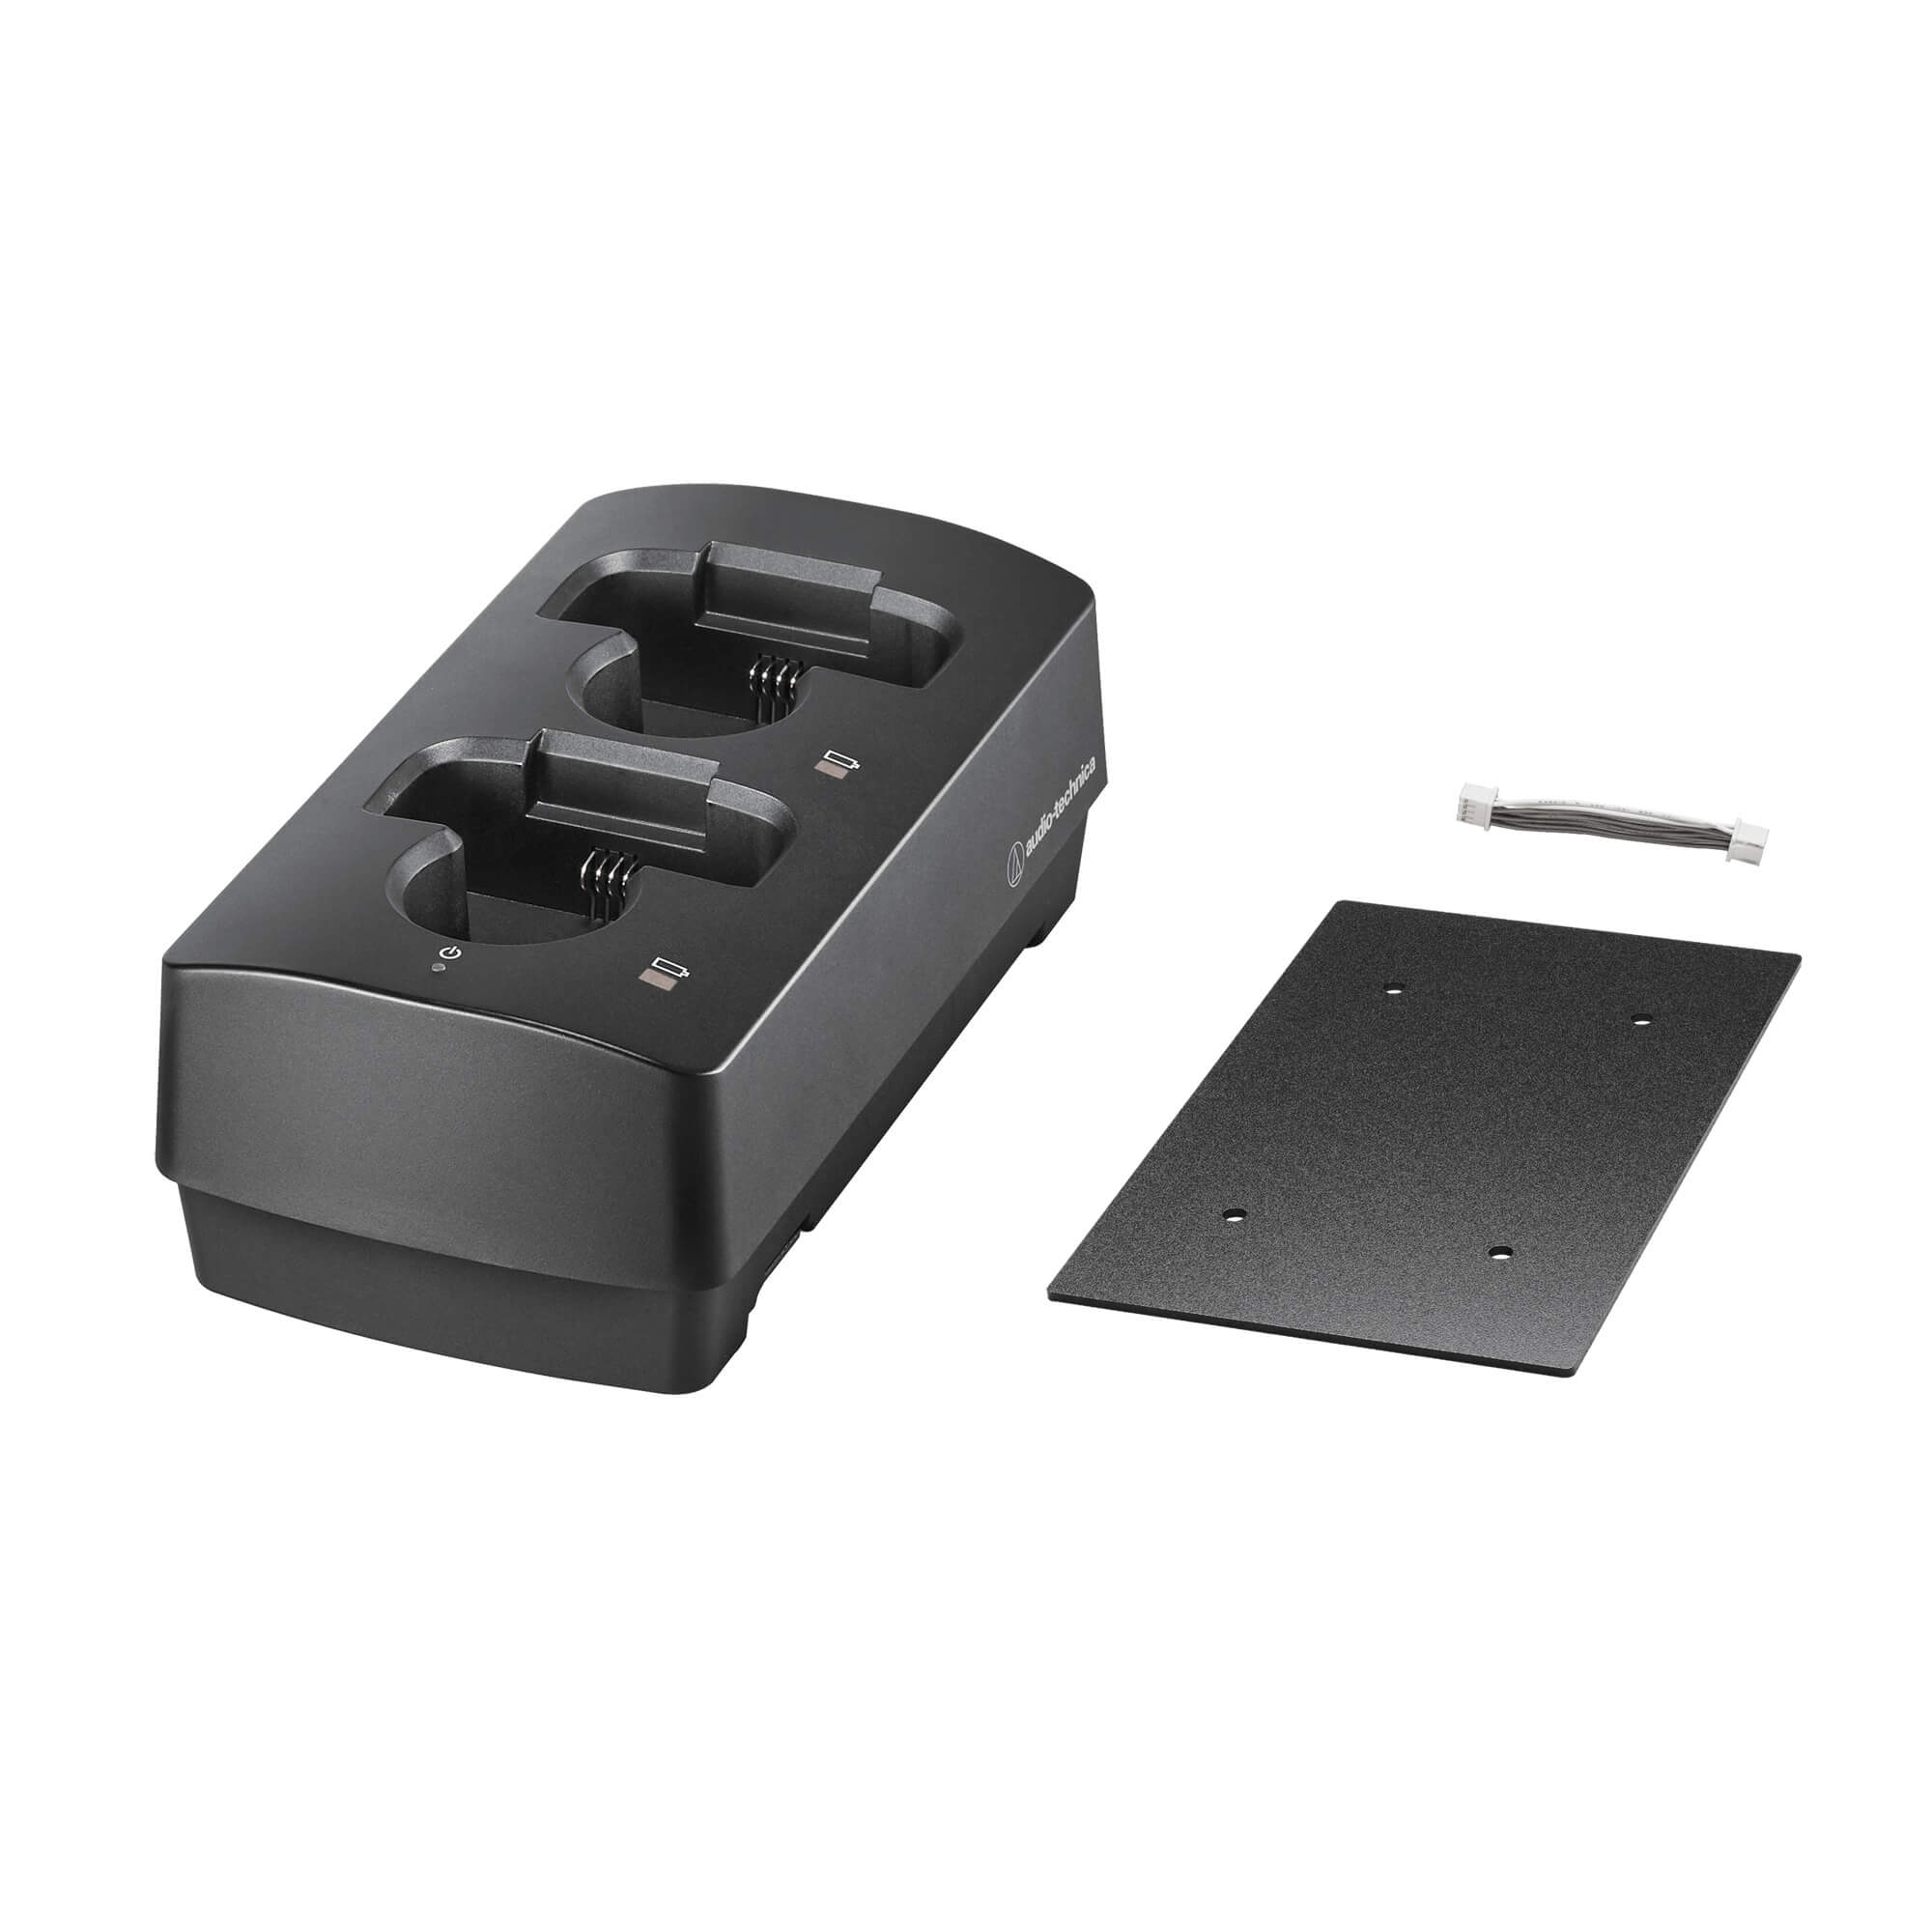 Audio-Technica ATW-CHG3EXP - Two-Bay Charging Station with Link Kit (3000 Series)